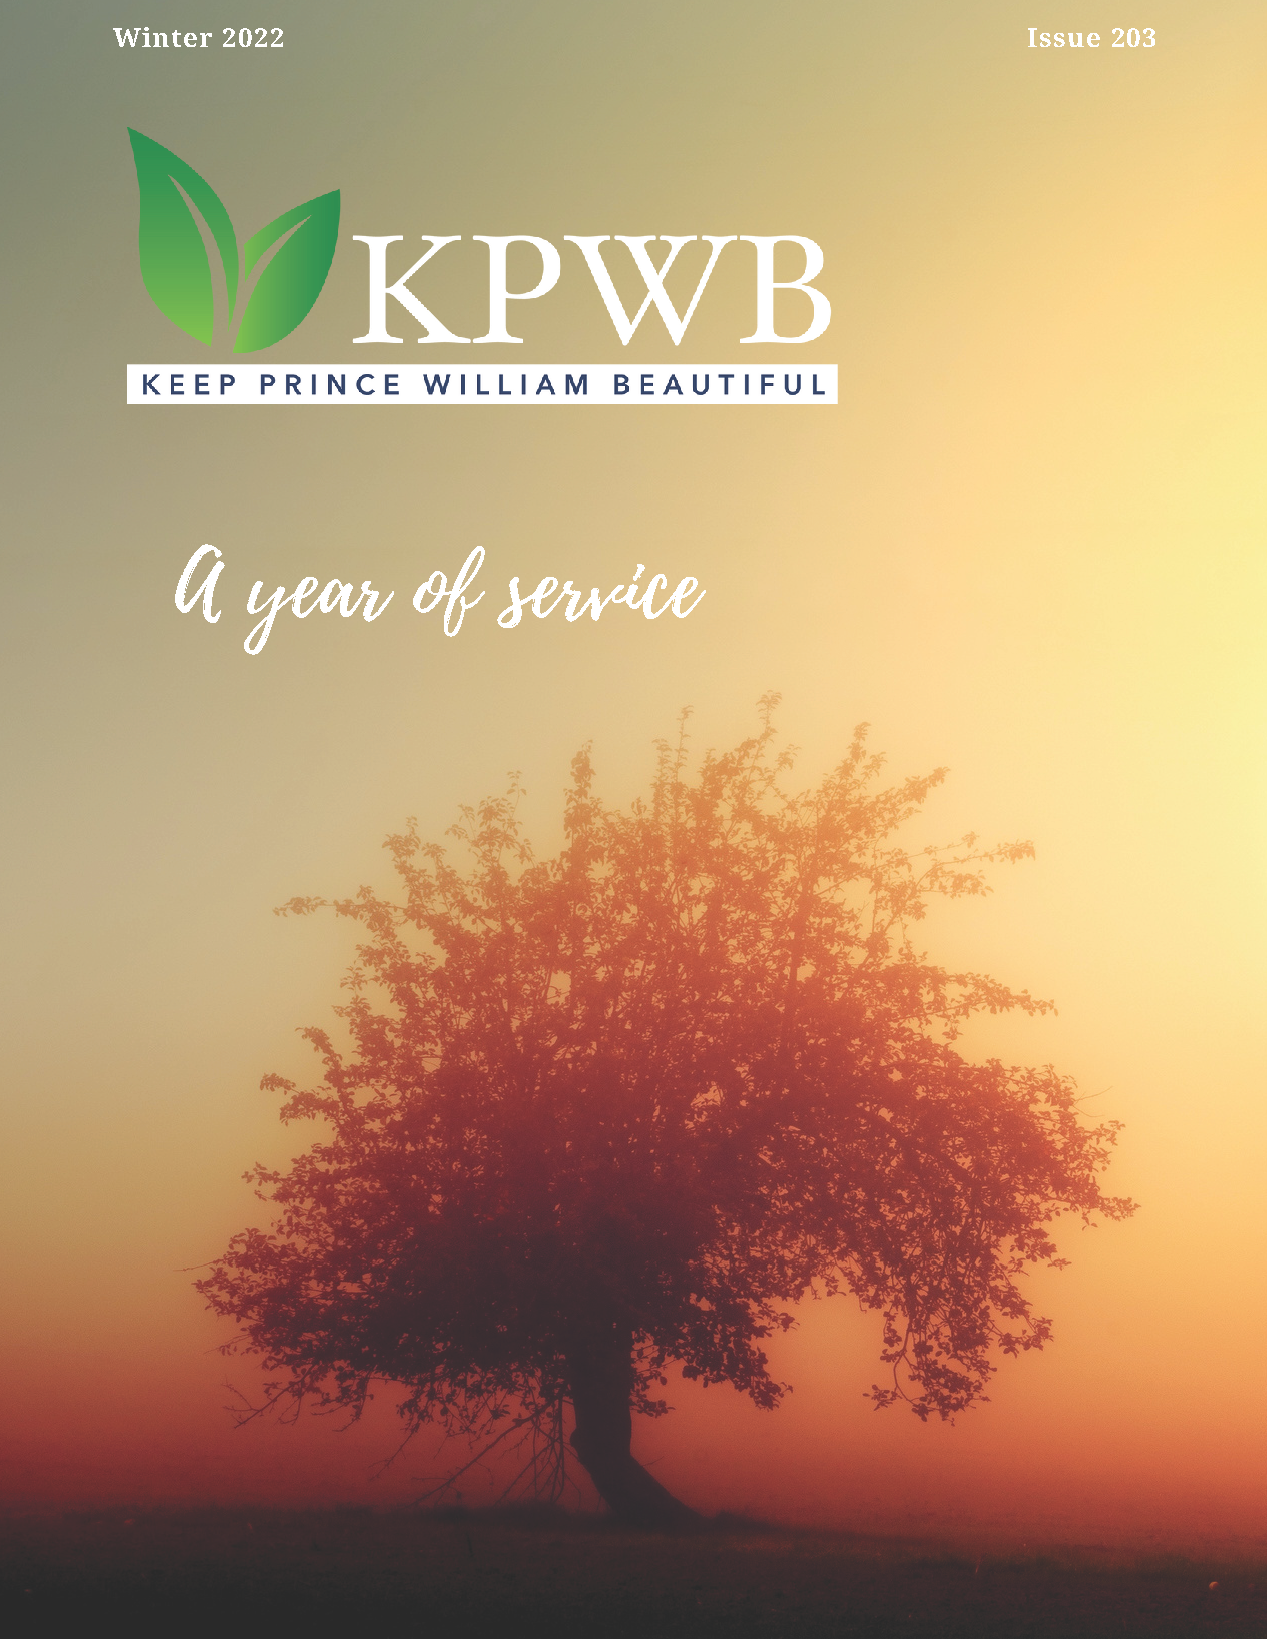 KPWB 2022 Review – A year of service